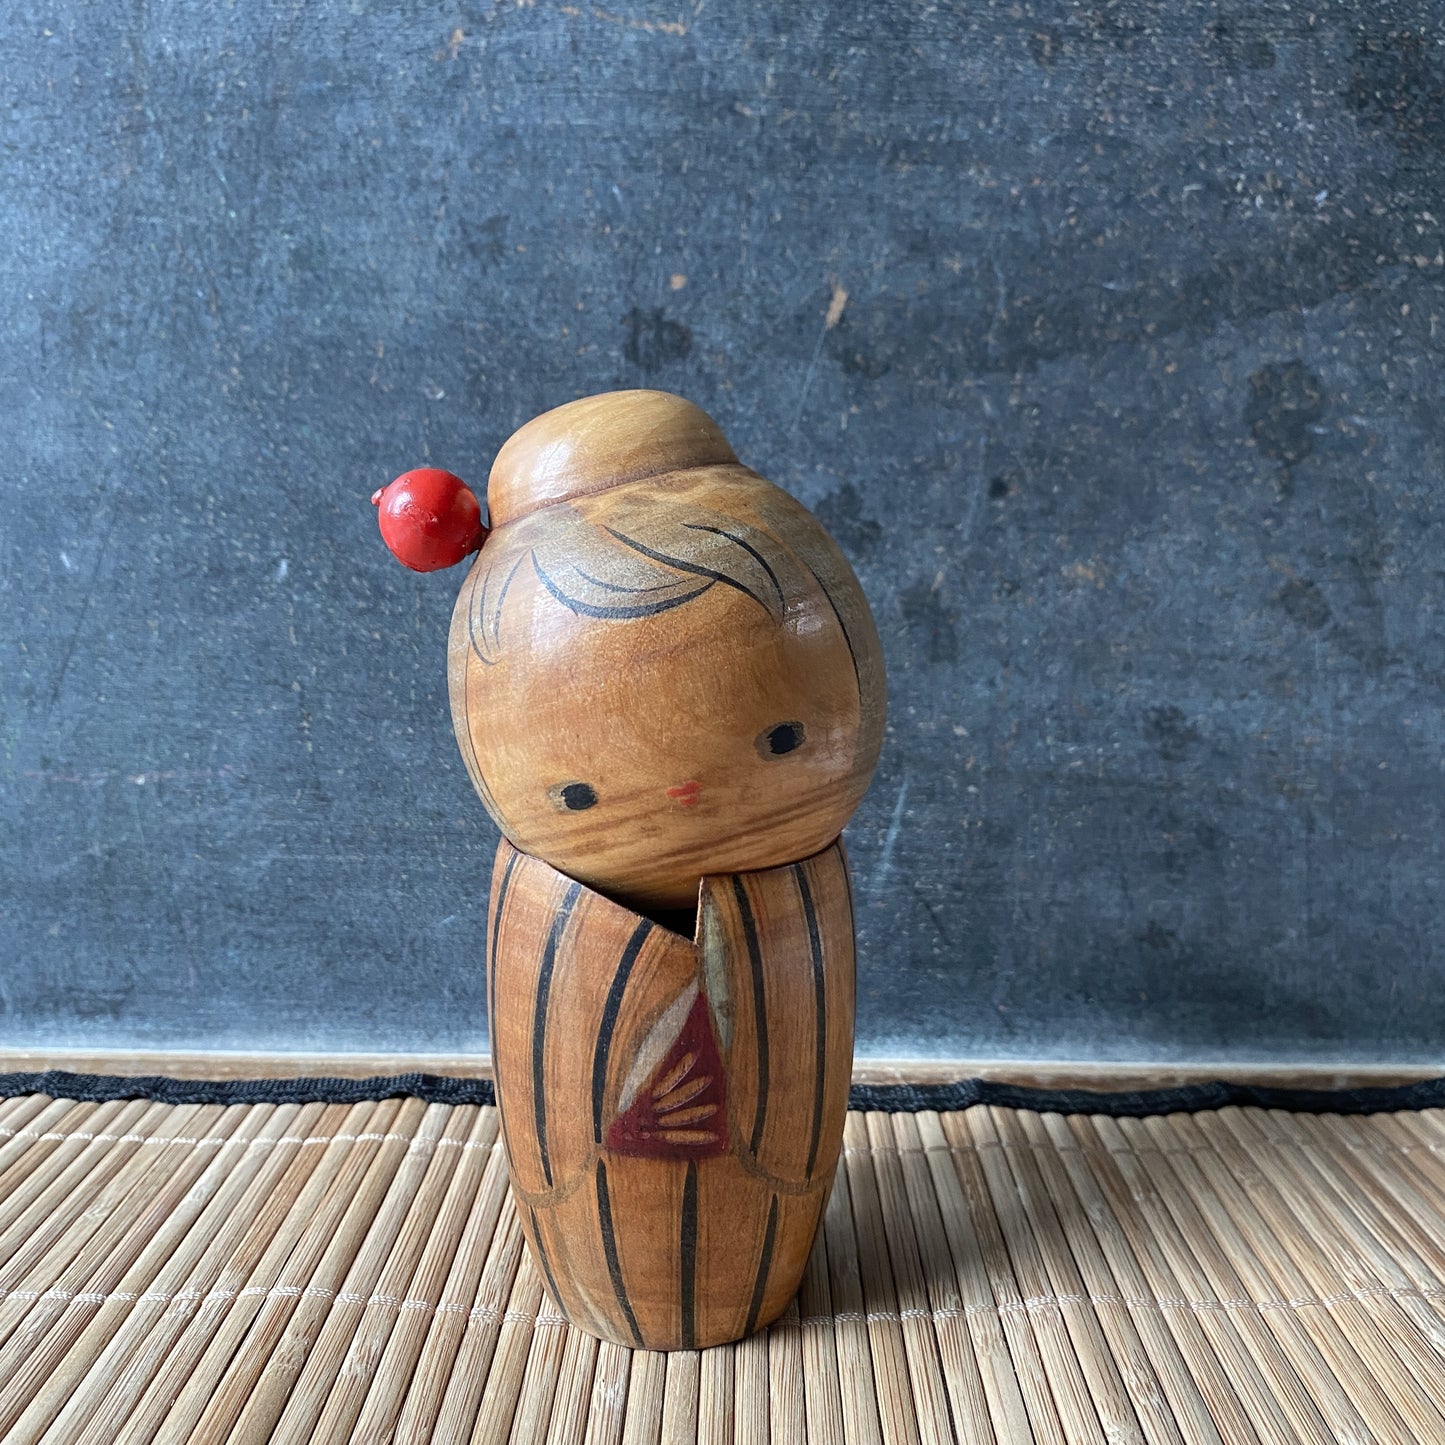 Vintage / Antique Kokeshi Doll, handpainted wood collectible from Japan